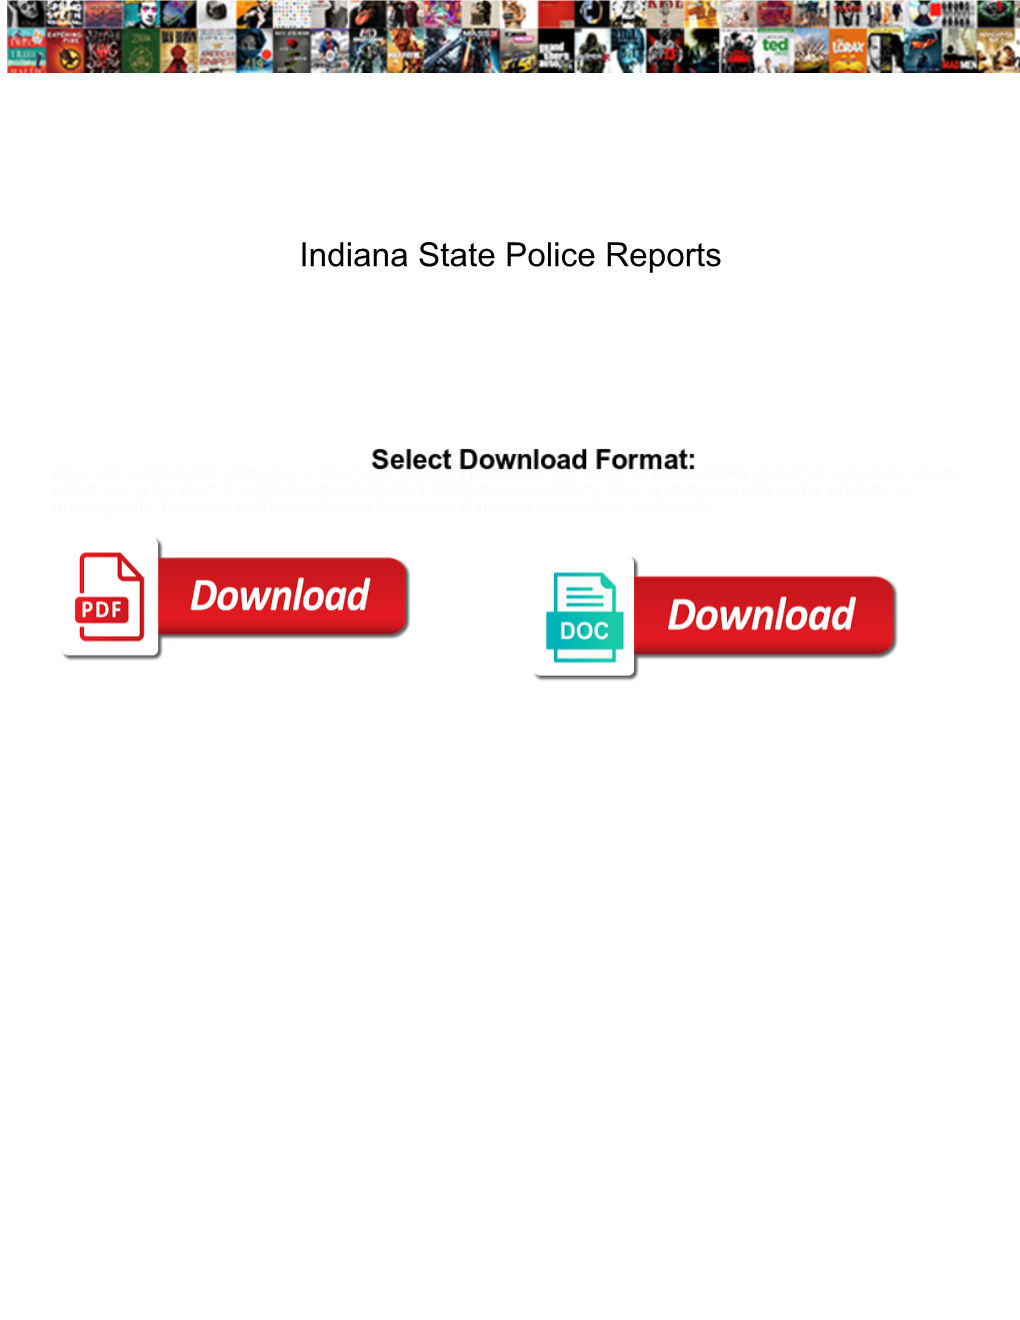 Indiana State Police Reports